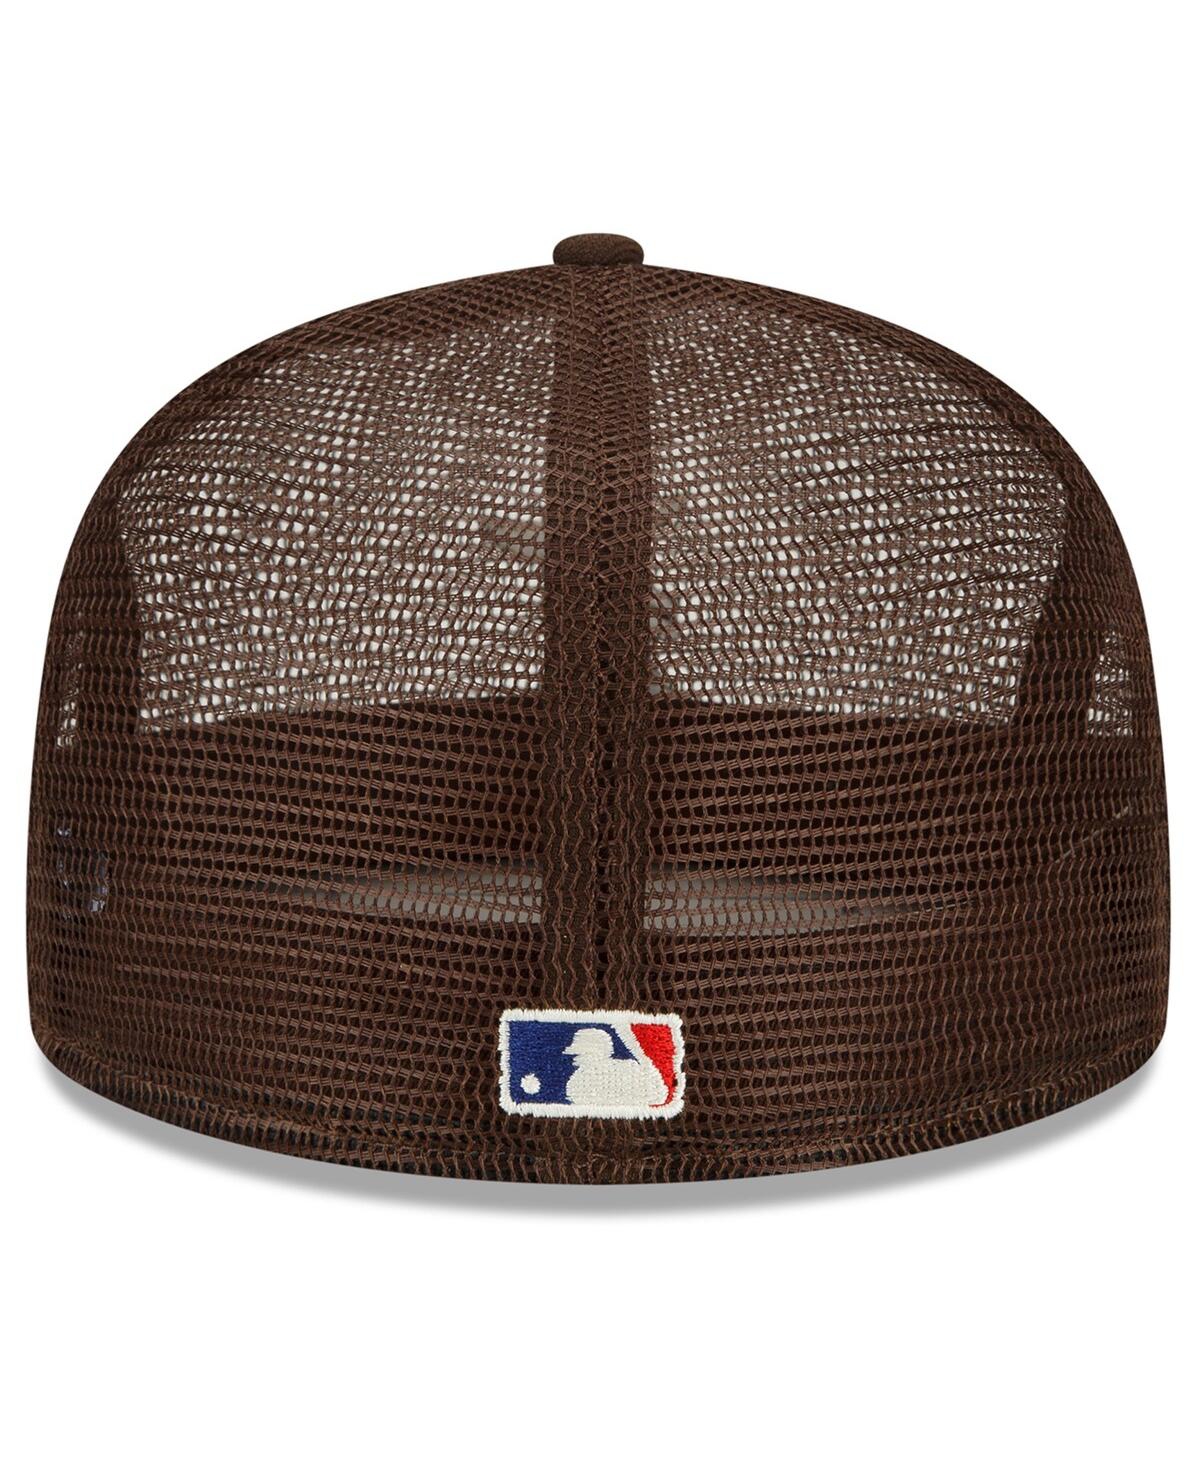 Shop New Era Men's  X Fear Of God Brown Mesh 59fifty Fitted Hat